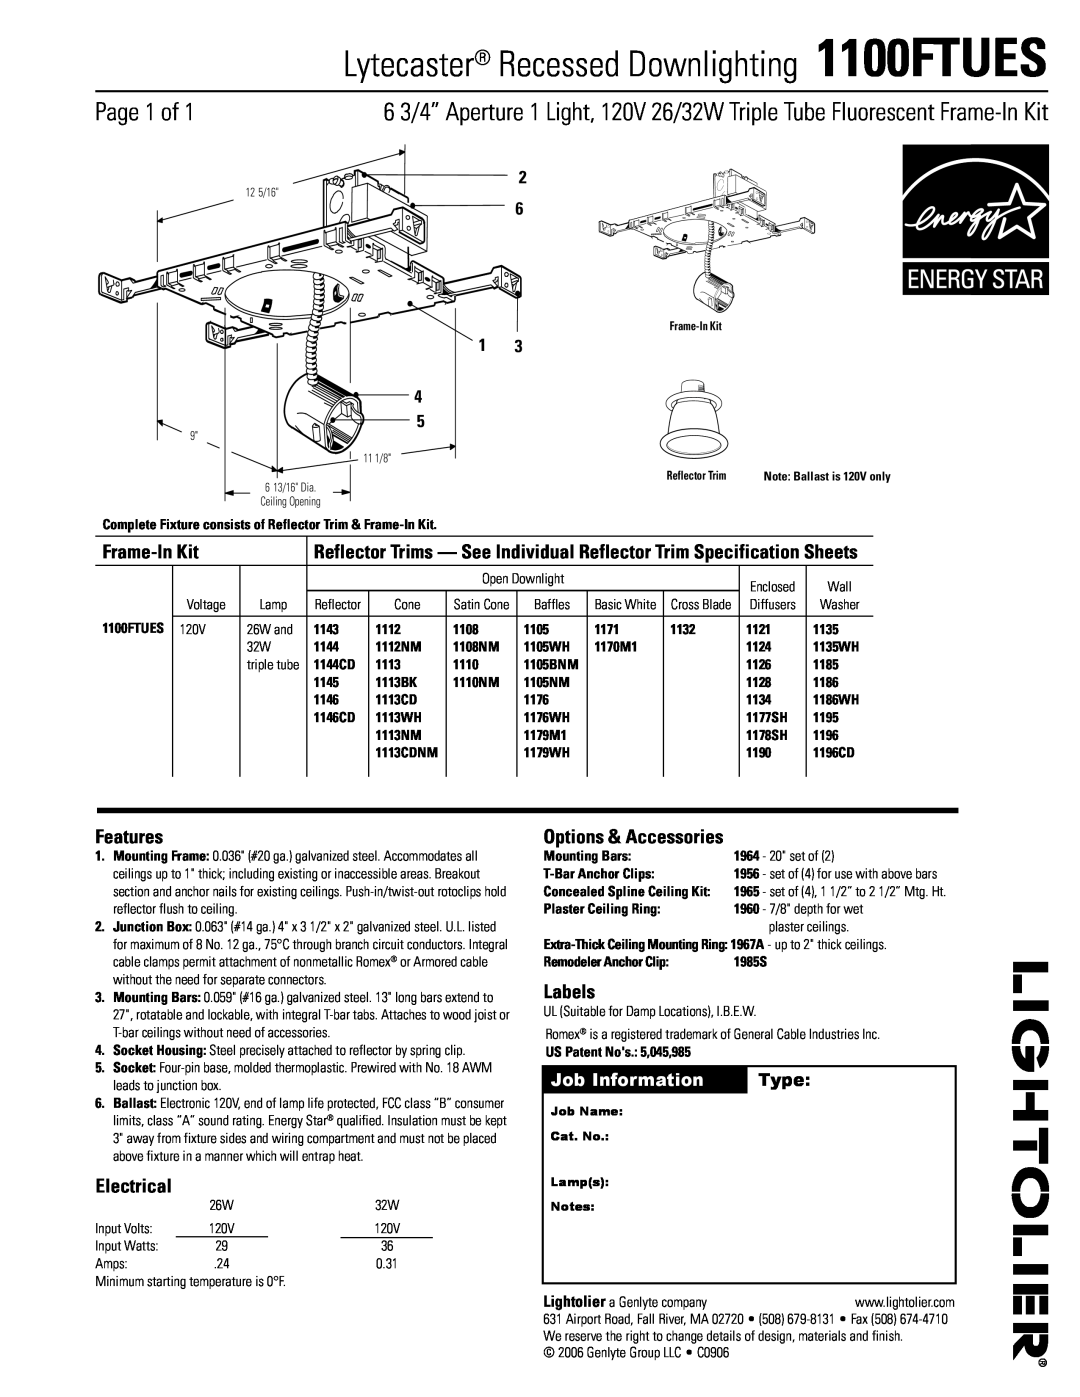 Lightolier specifications Lytecaster Recessed Downlighting 1100FTUES, Page  of, Frame-InKit, Features, Electrical 